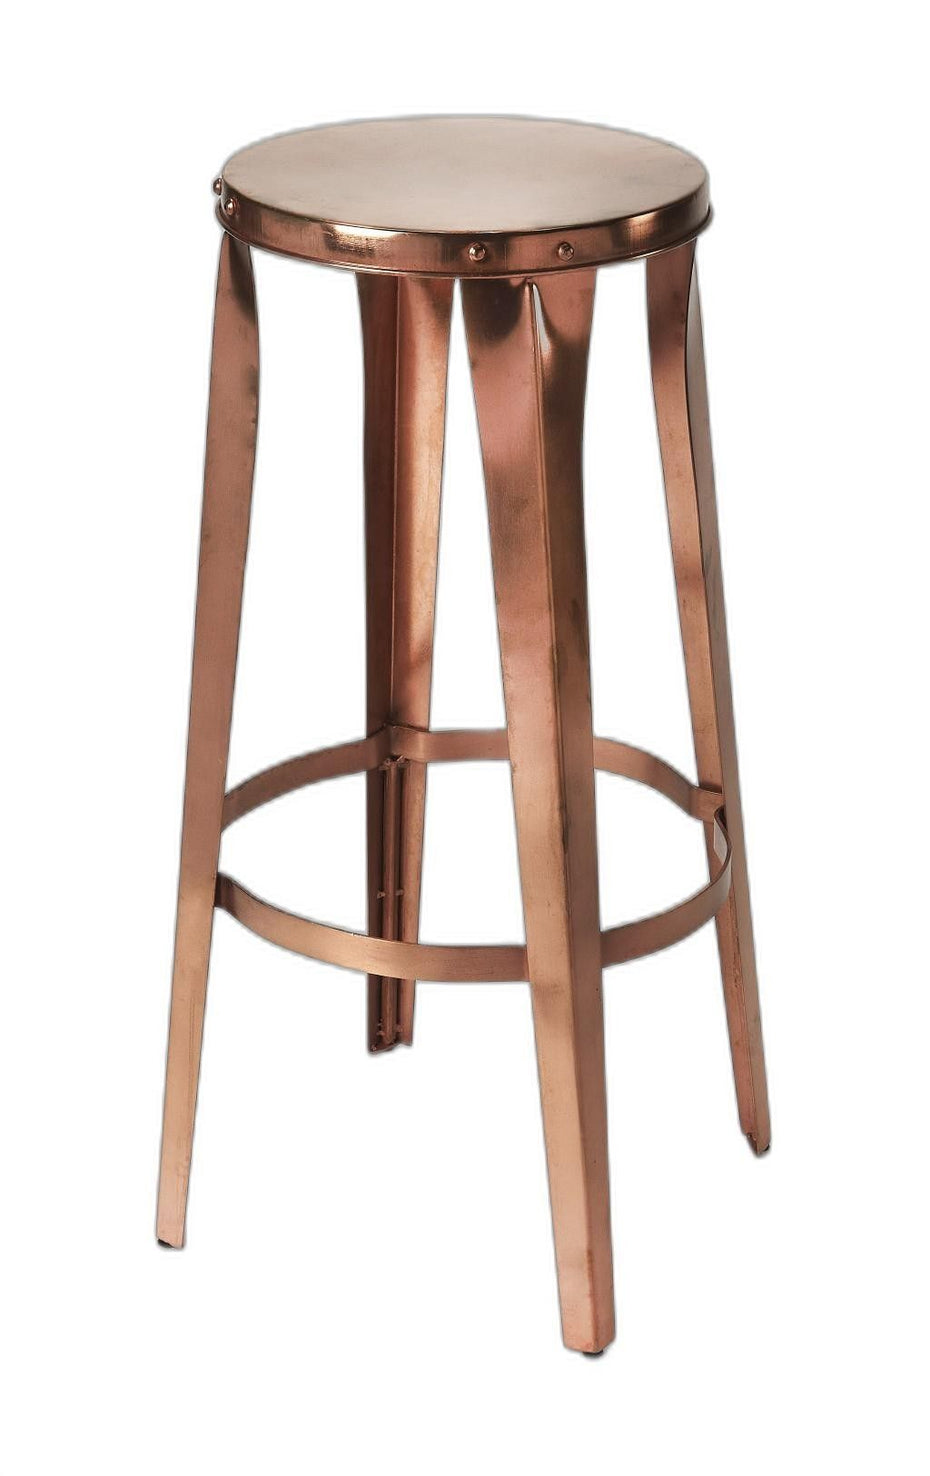 Rustic Backless Bar Stool - Copper